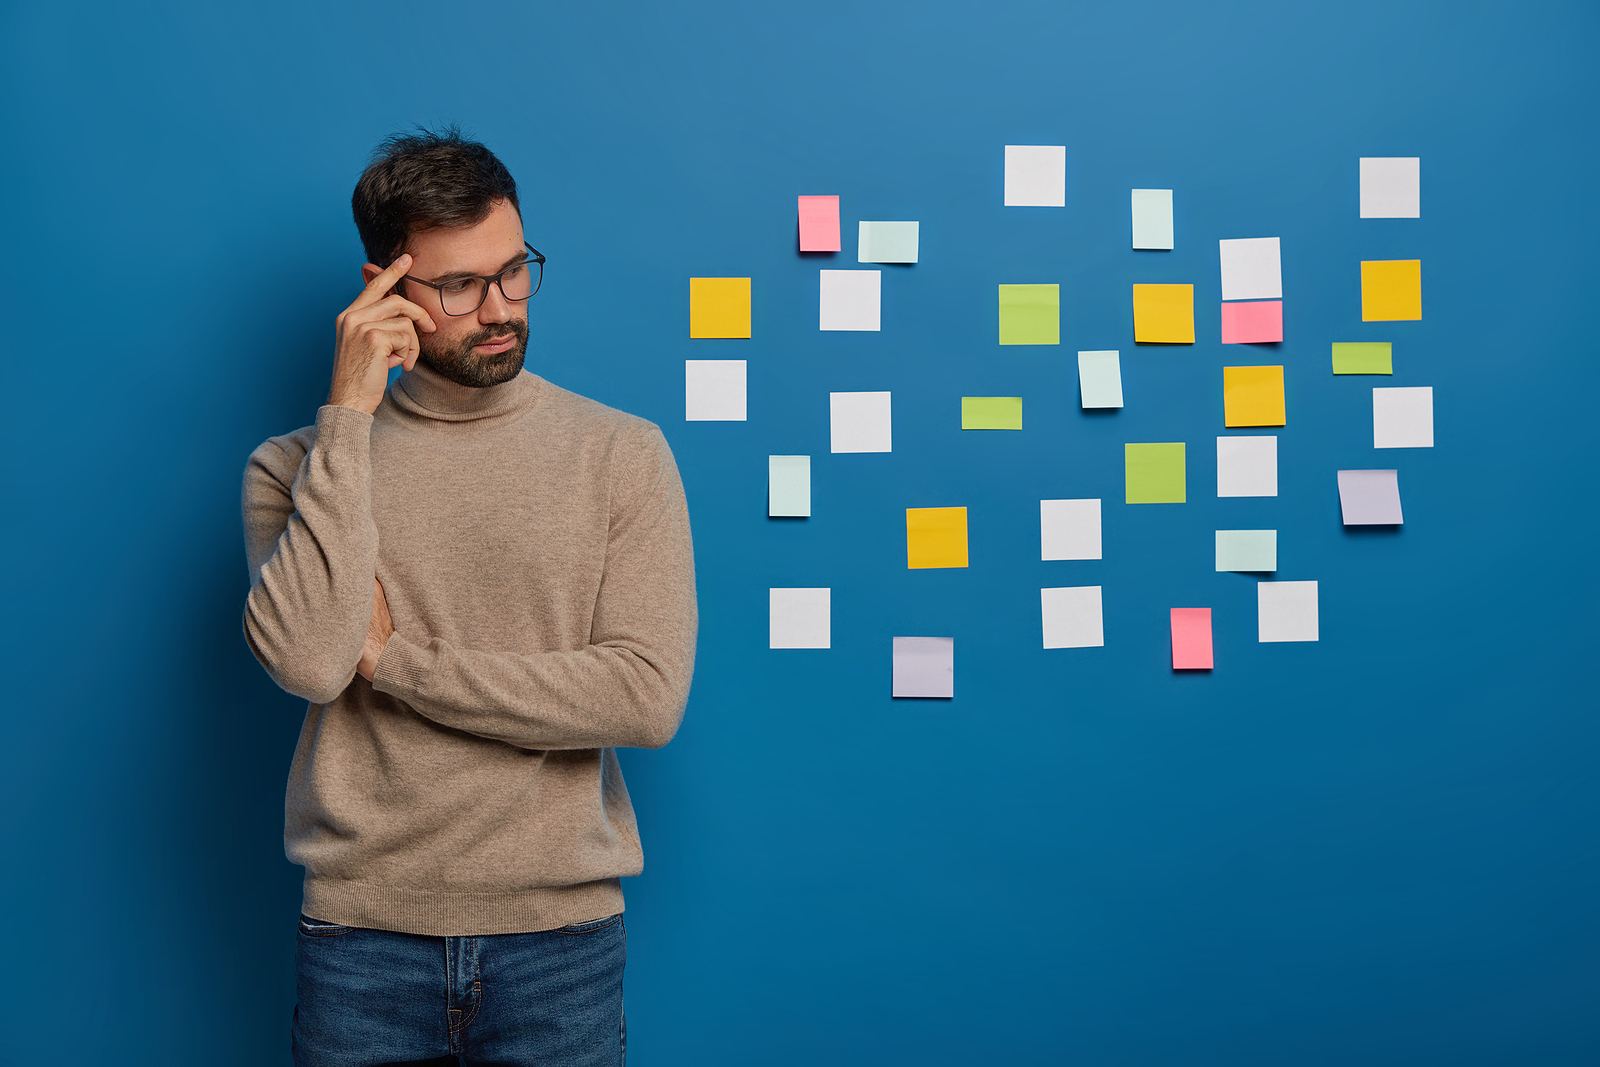 A man with glasses concentrates on something in front of a wall covered in sticknotes.